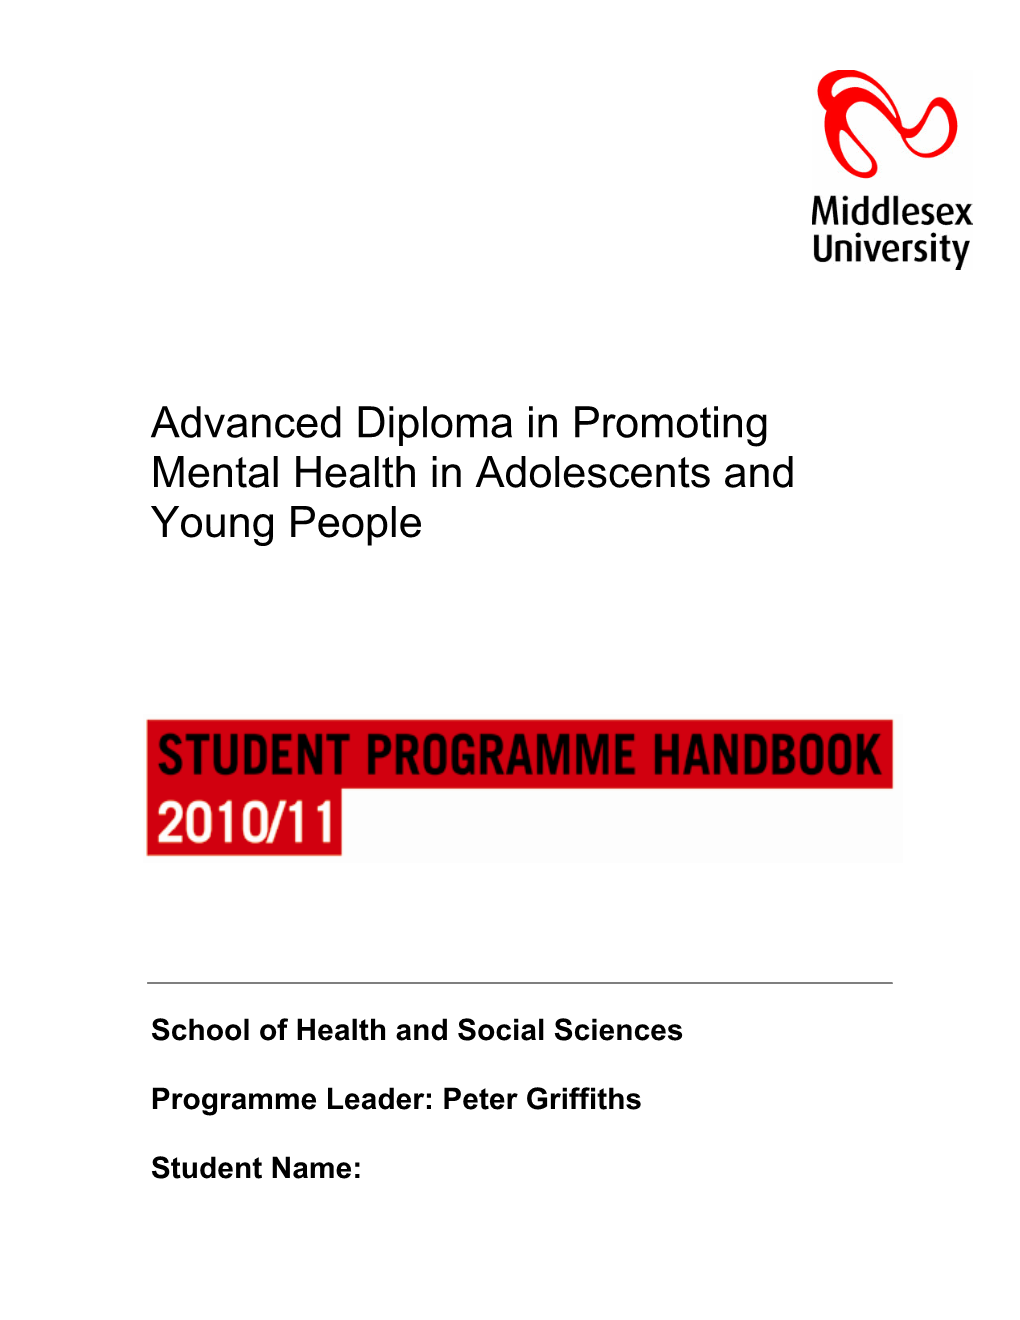 Advanced Diploma in Promoting Mental Health in Adolescents and Young People